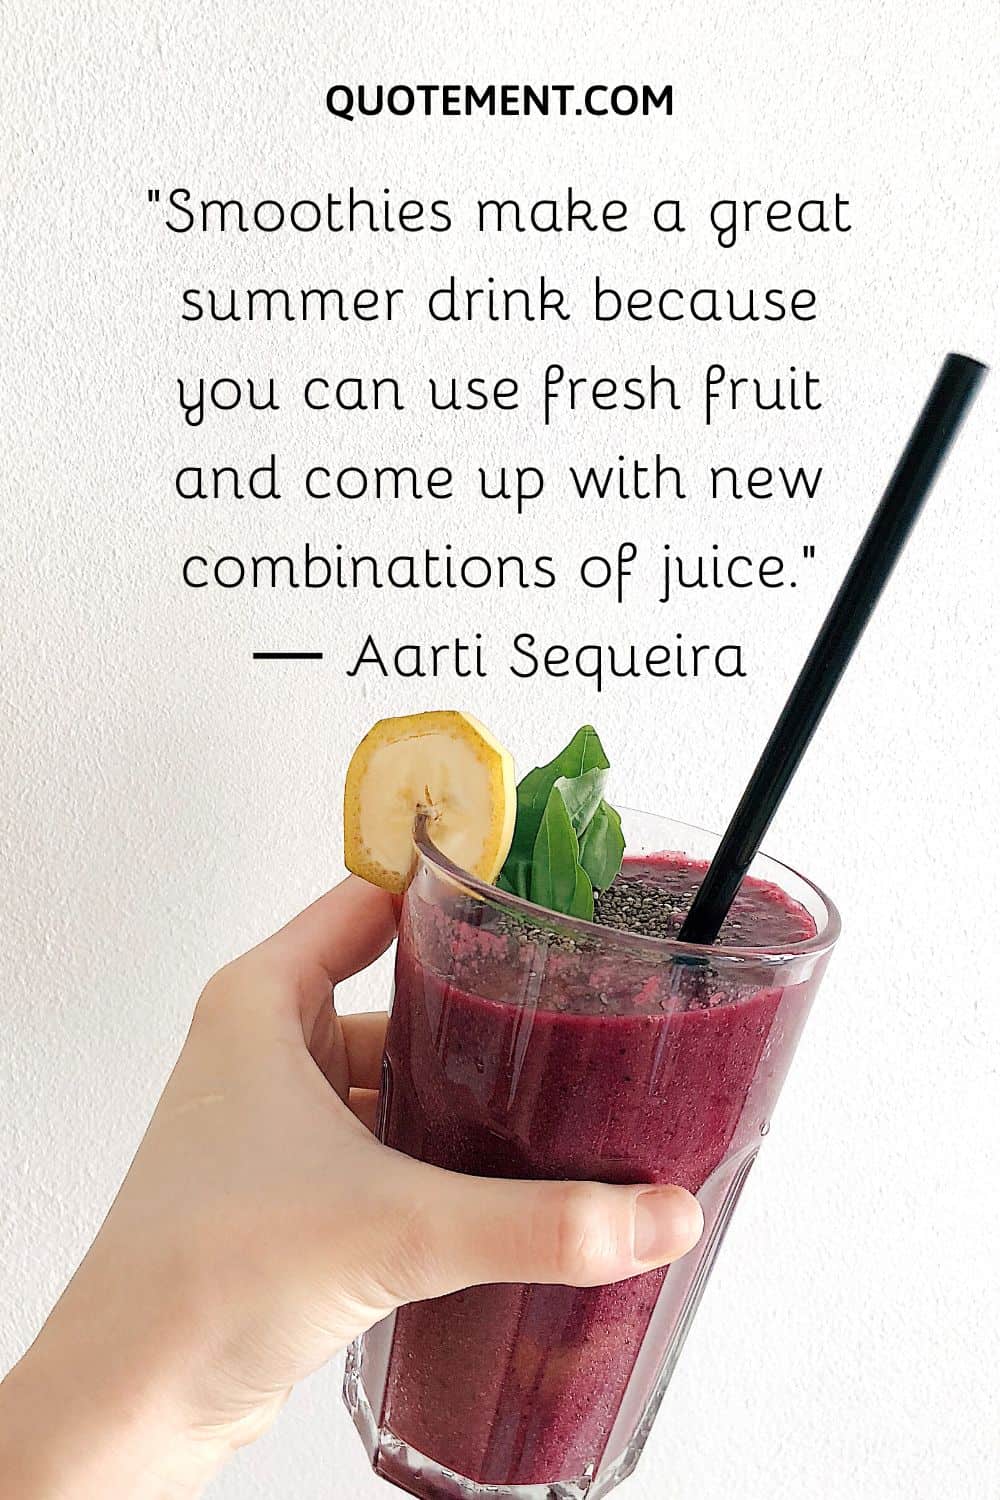 “Smoothies make a great summer drink because you can use fresh fruit and come up with new combinations of juice.” ― Aarti Sequeira